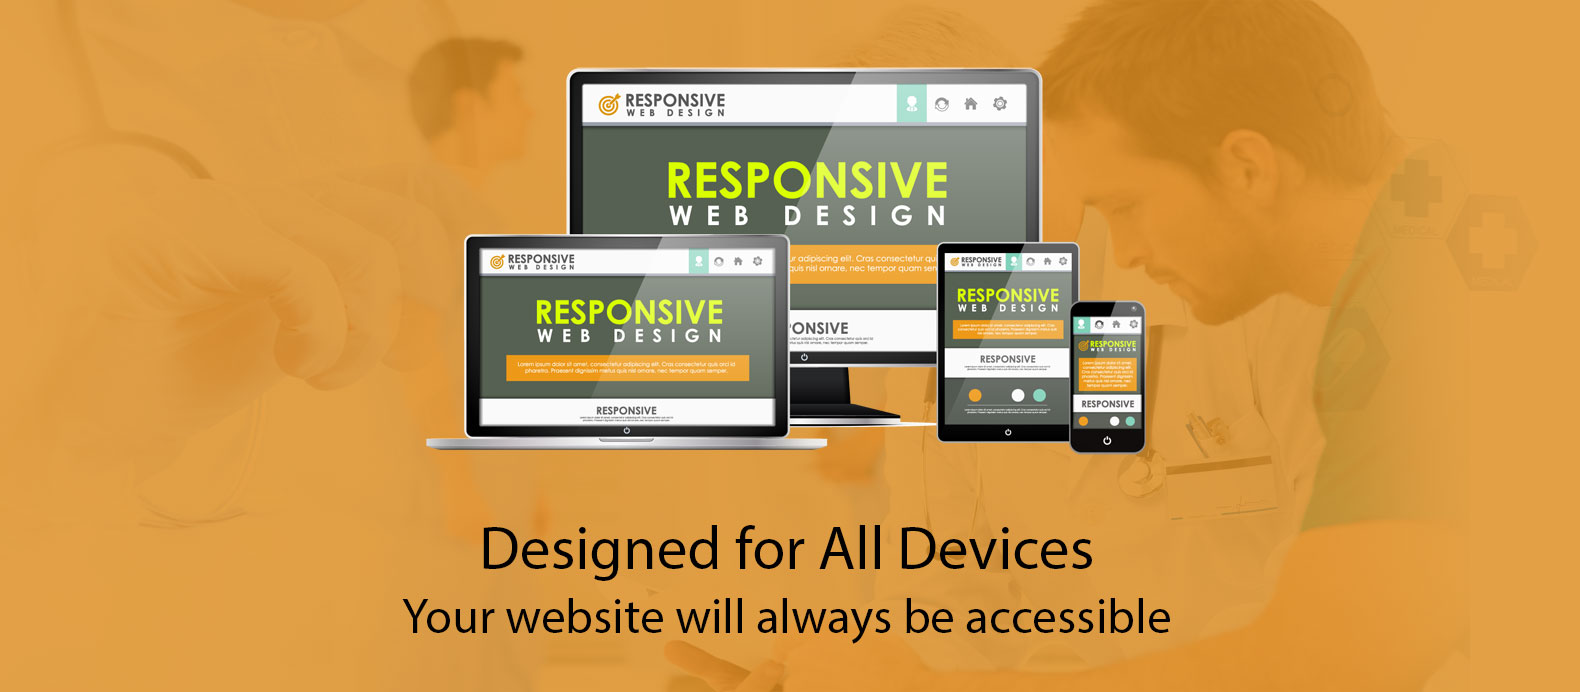 Designed for All Devices, Your website will always be accessible